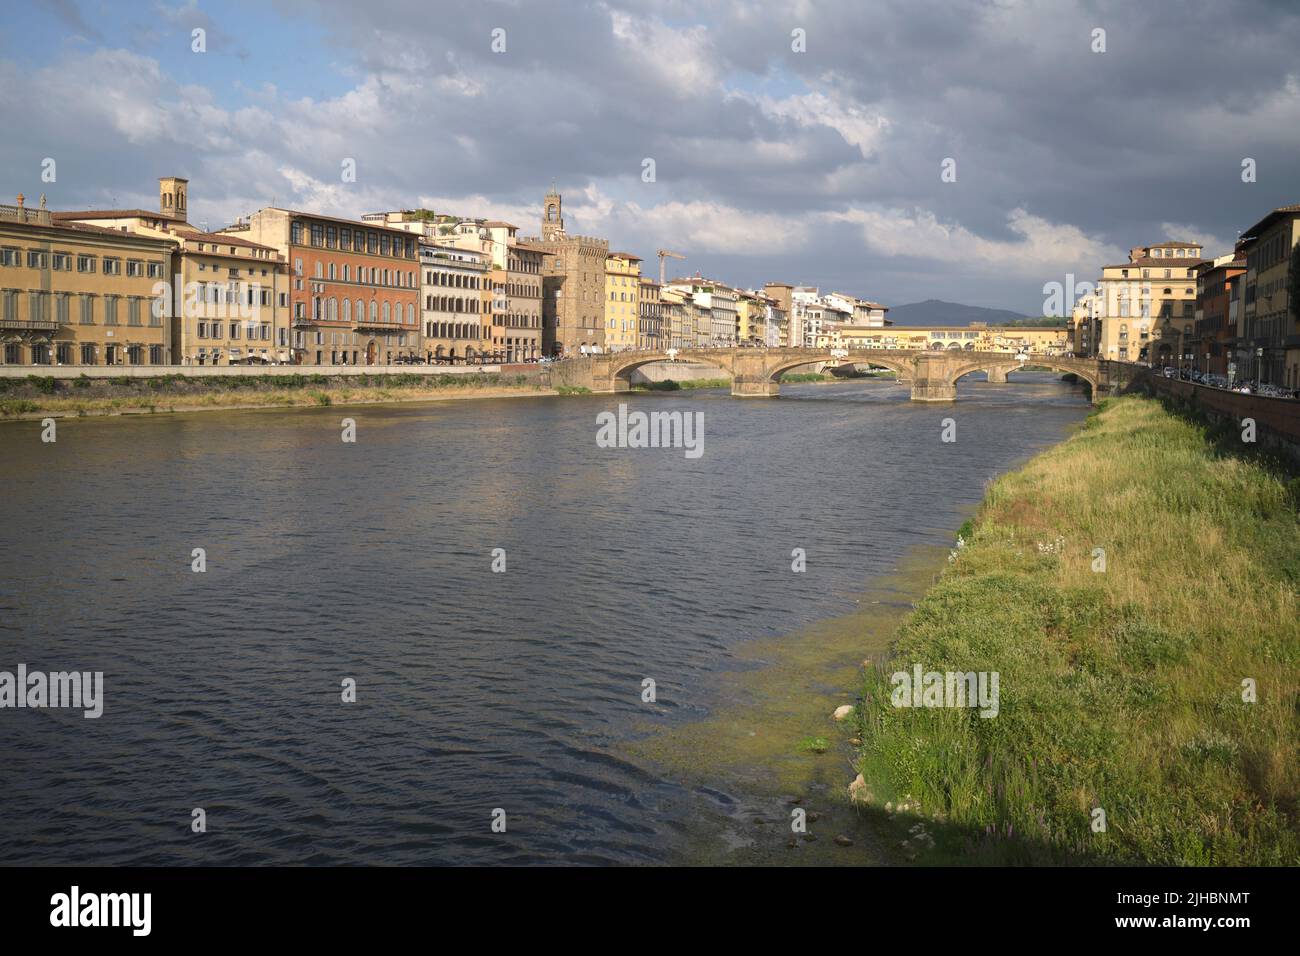 River Arno and Ponte Vecchio in Florence Italy Stock Photo